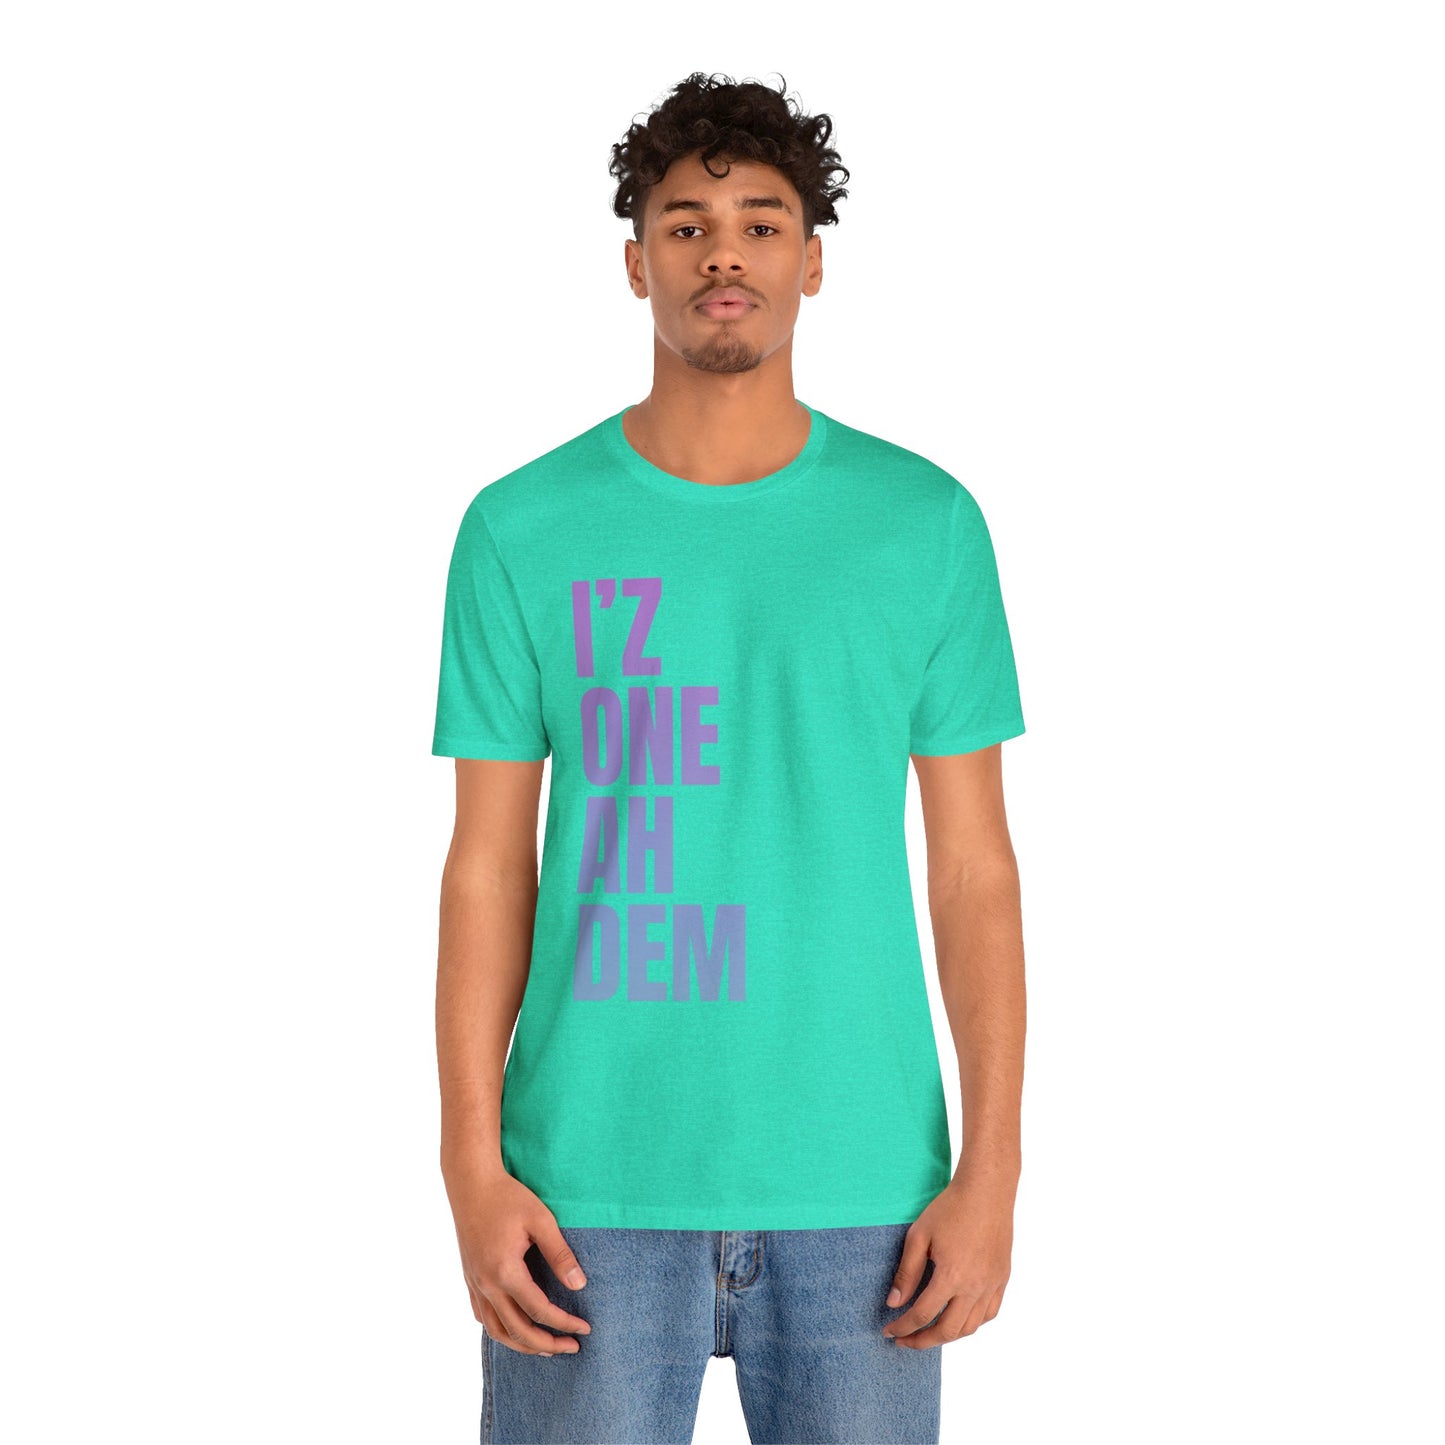 I'z One Ah Dem - Shal SS Tee (pink into blue gradient)